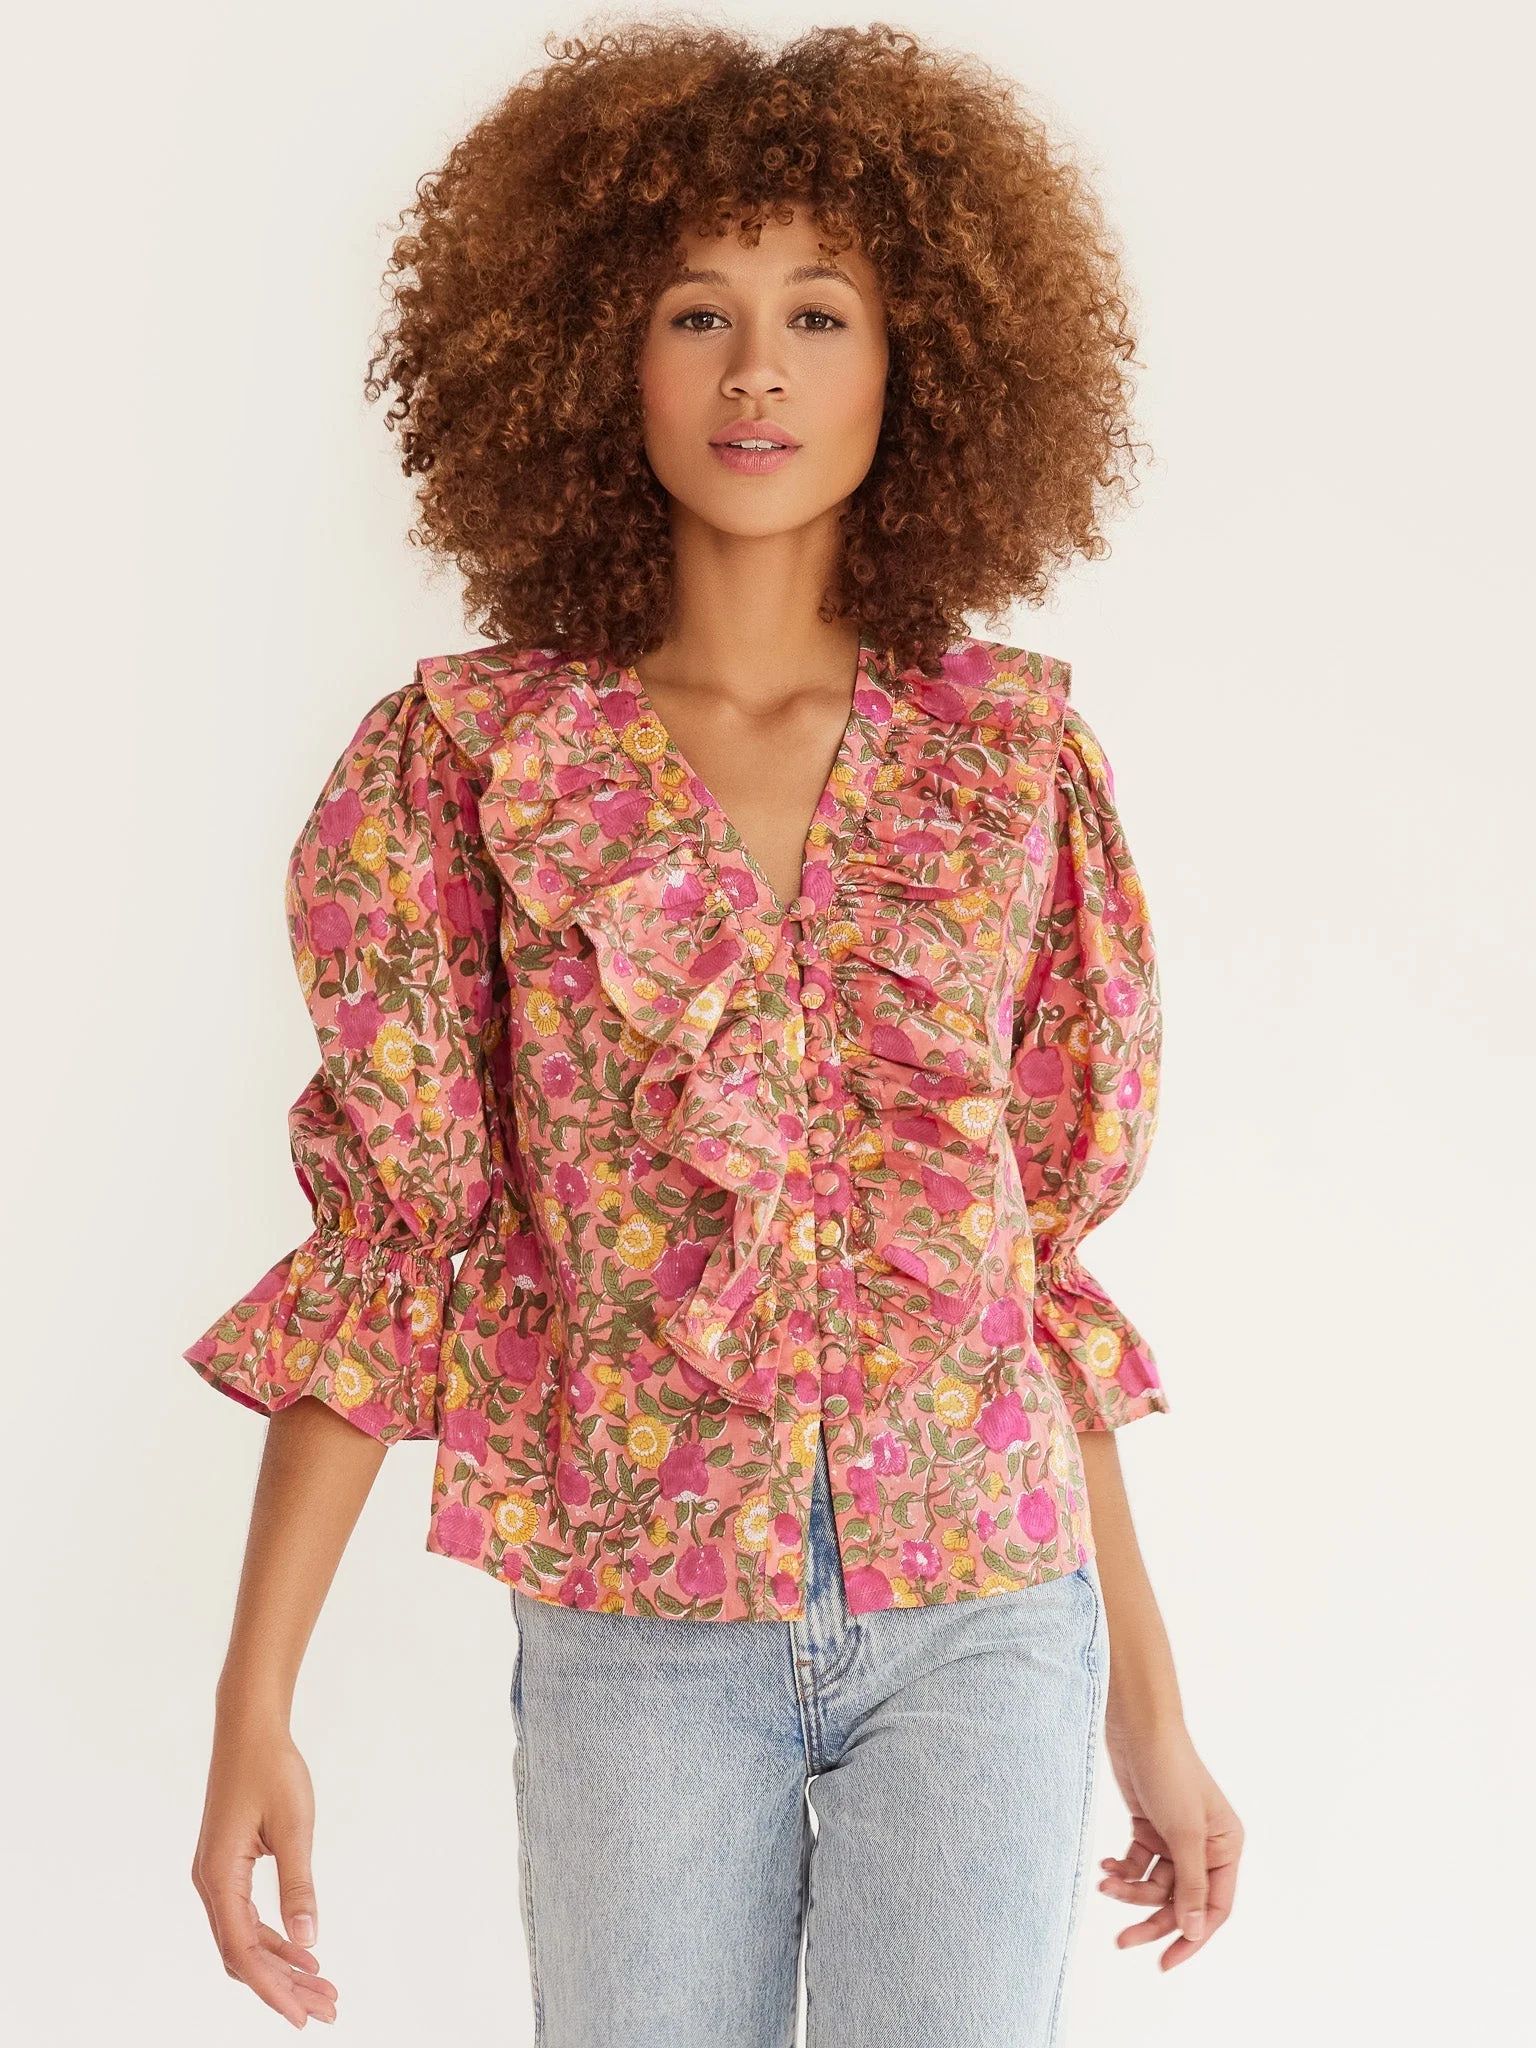 Shop Mille - Hanna Top in Passionfruit | Mille